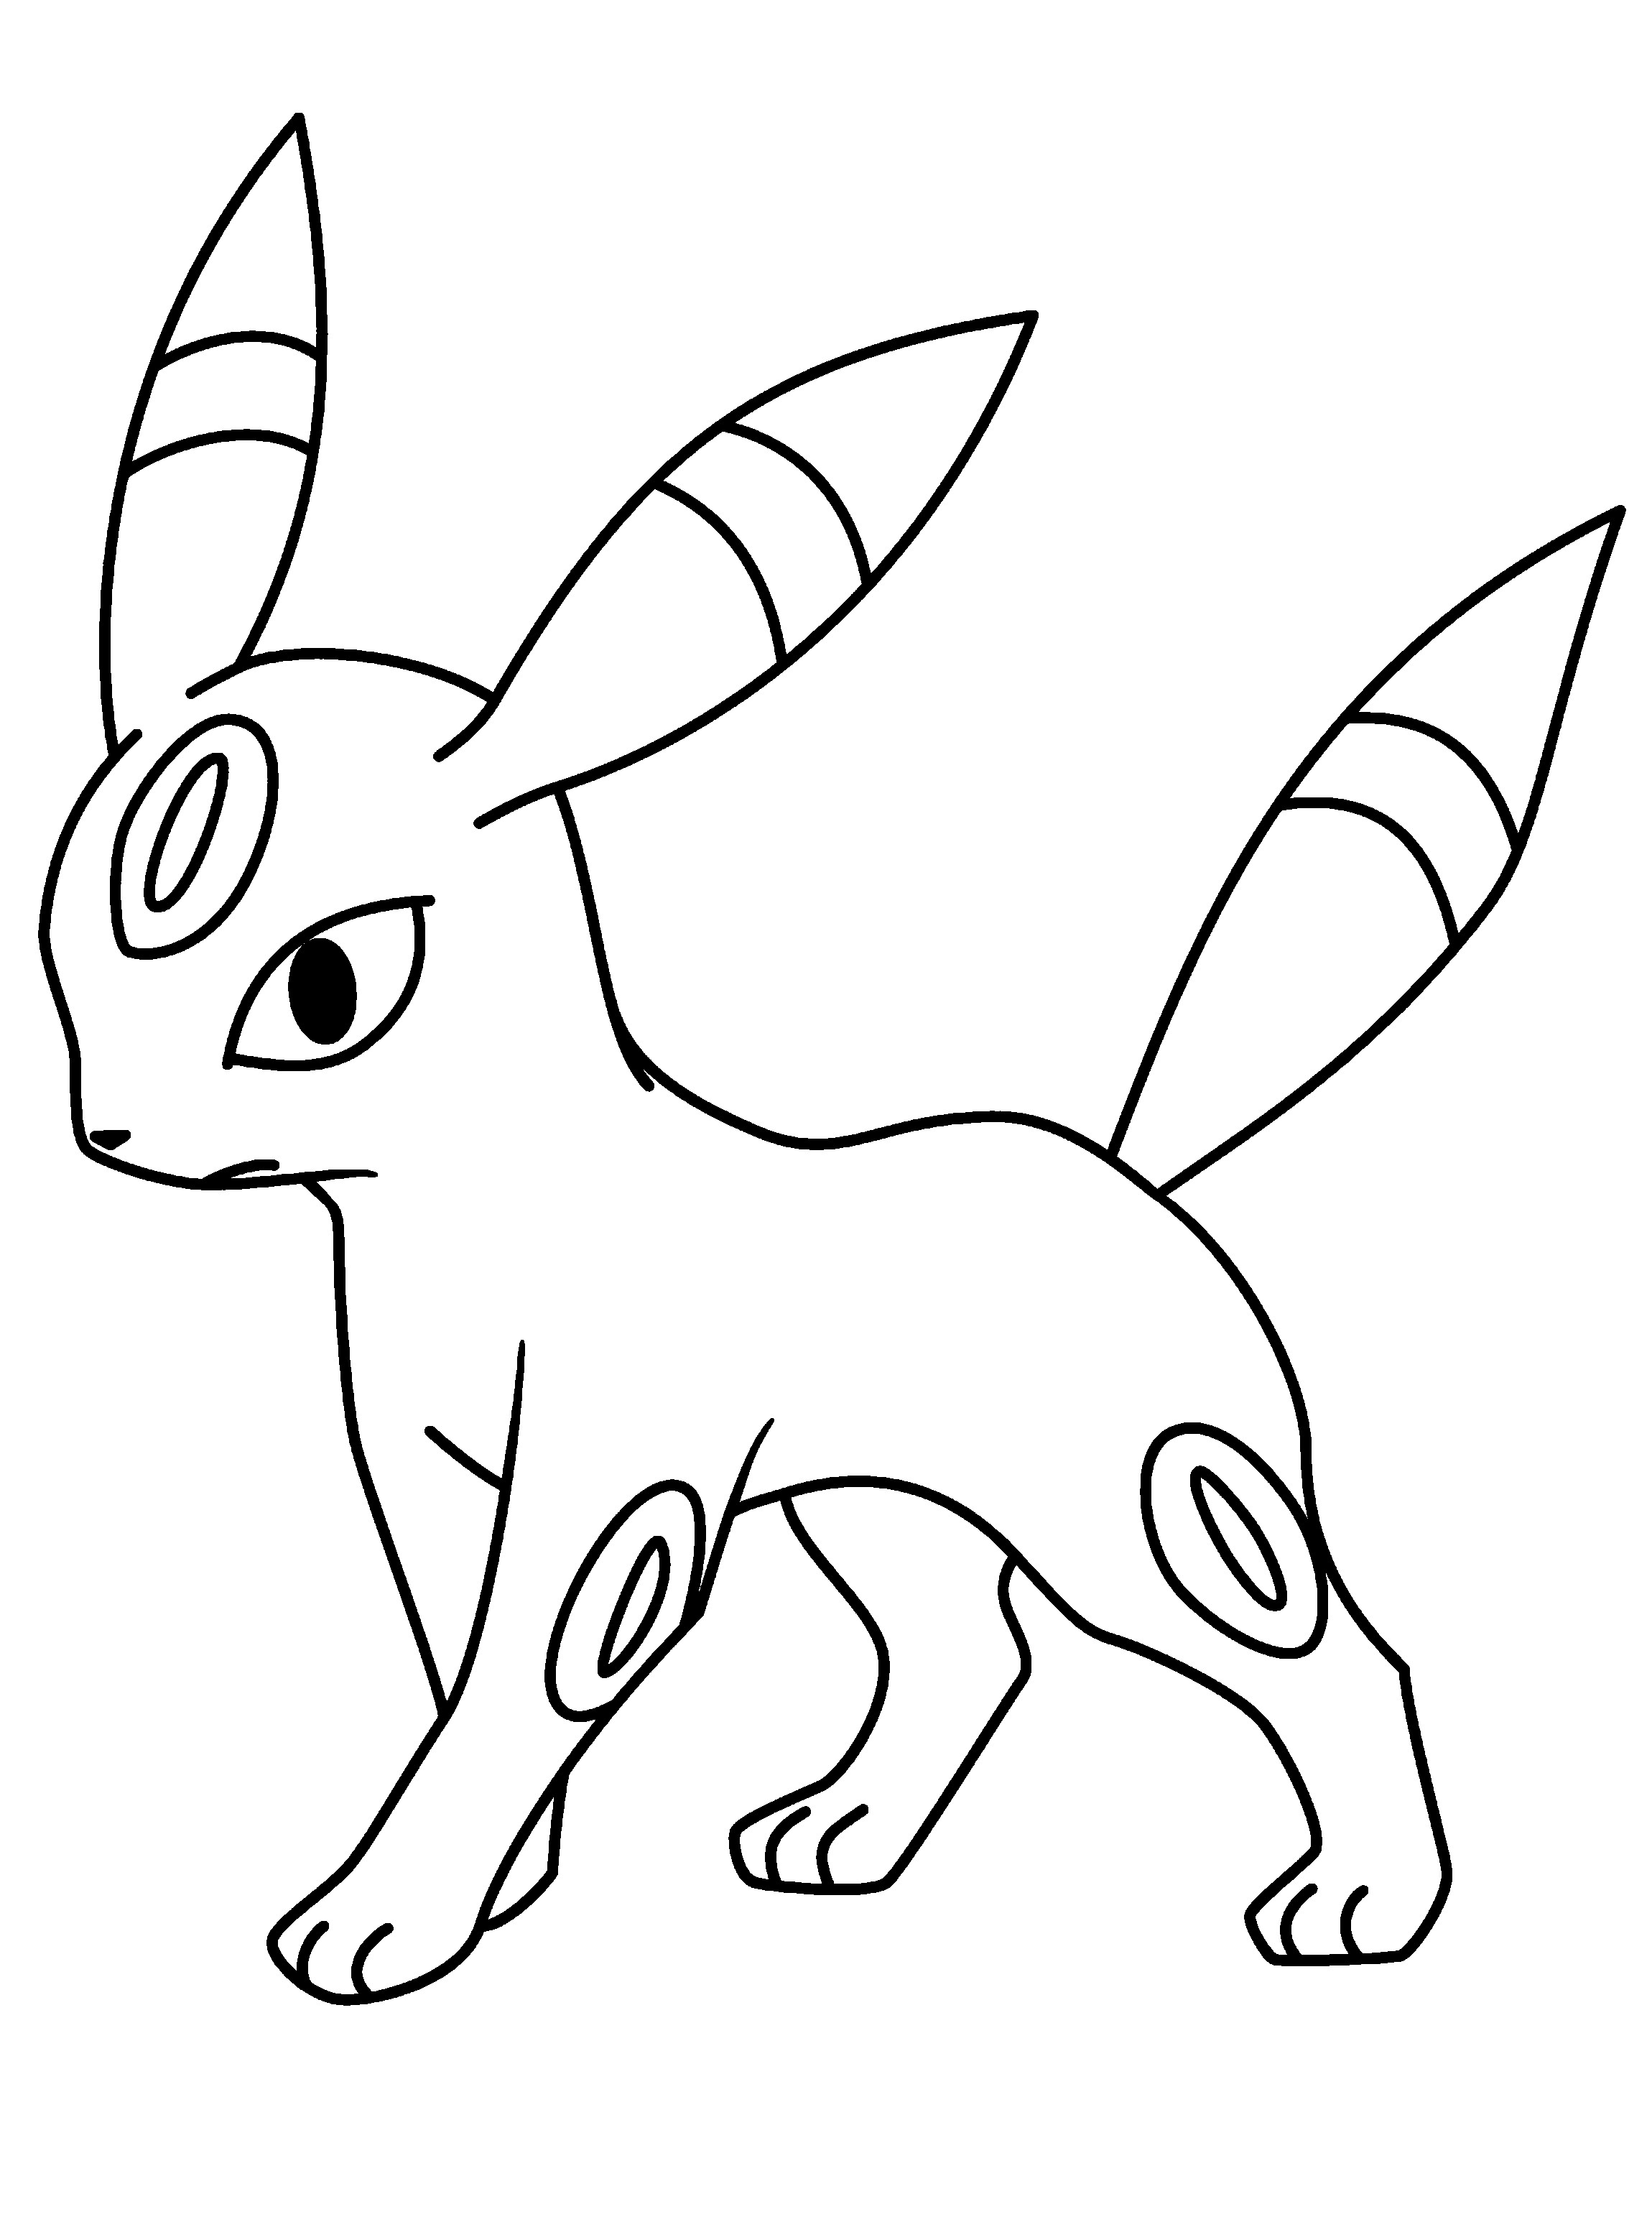 Pokemon Coloring Pages For Girls | Coloring Pages For Kids